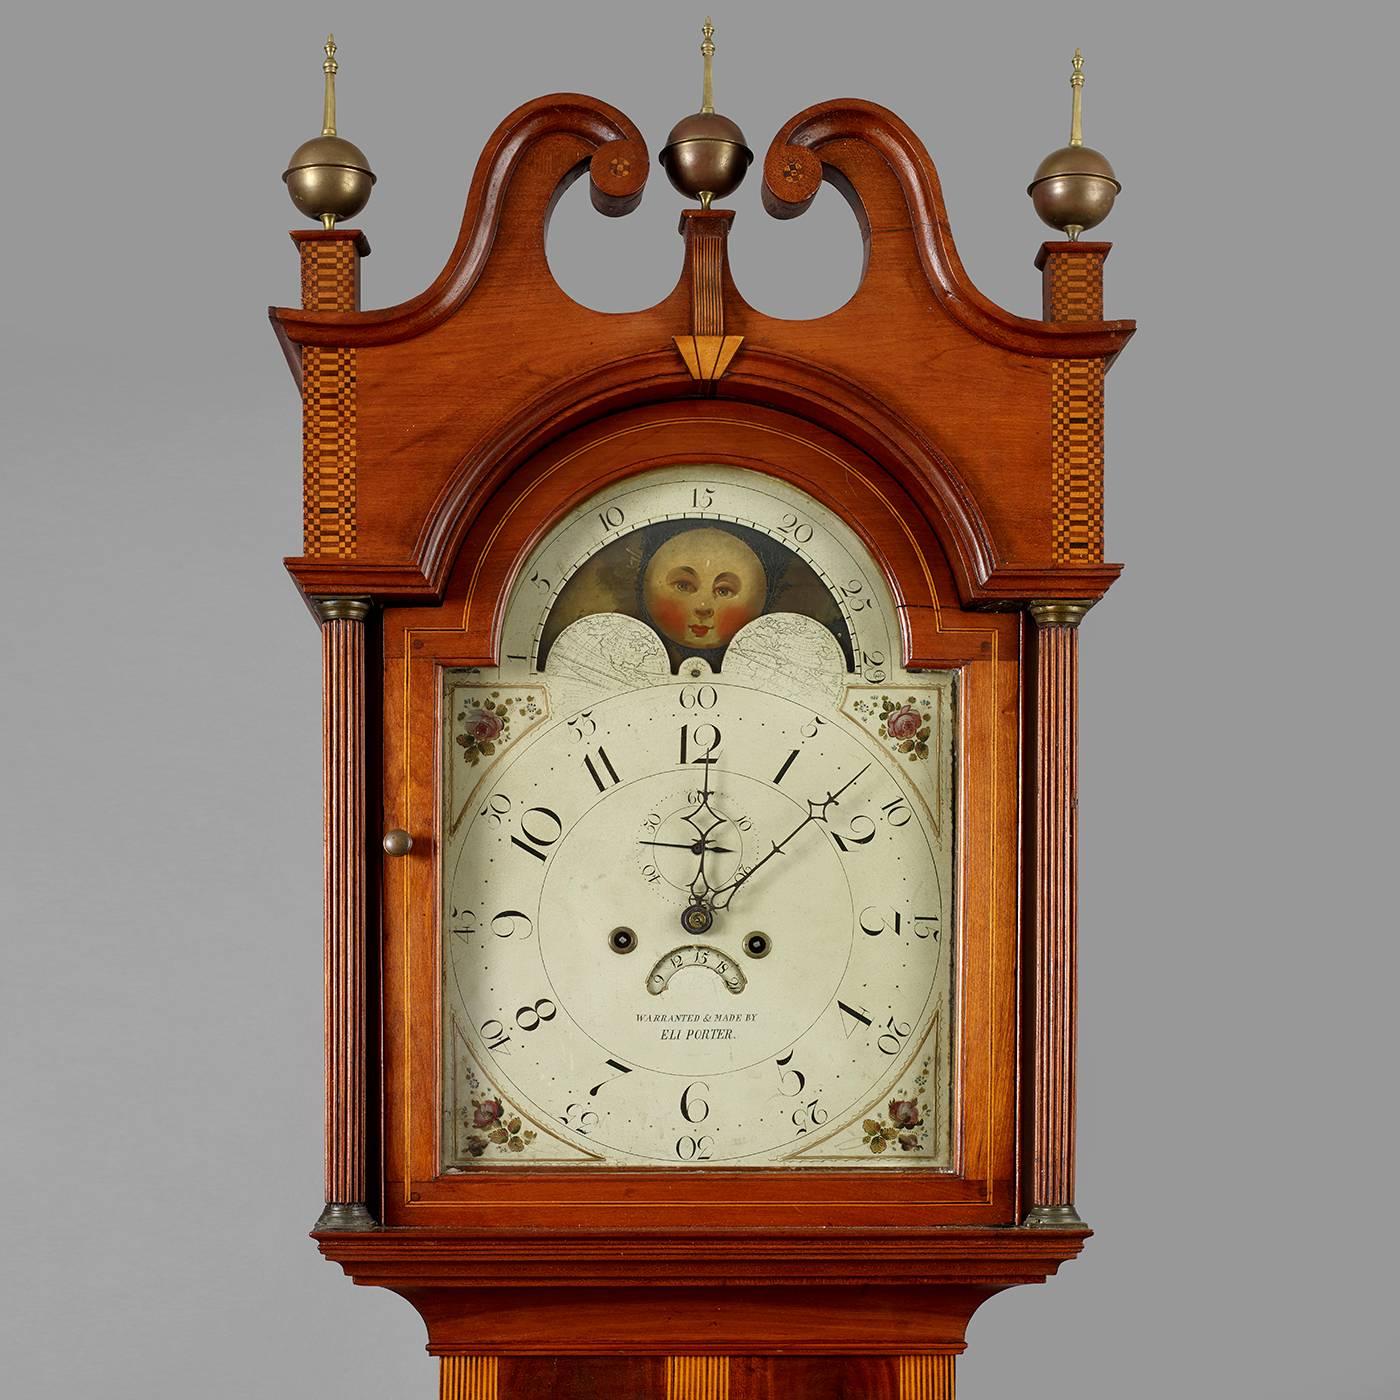 Williamstown, MA., circa 1810. Cherry, mahogany, various woods for inlay Condition: Excellent condition, (see condition report). Highly inlaid formal cherry tall case clock made and signed by Eli Porter on bothe the dial and the movement. The form